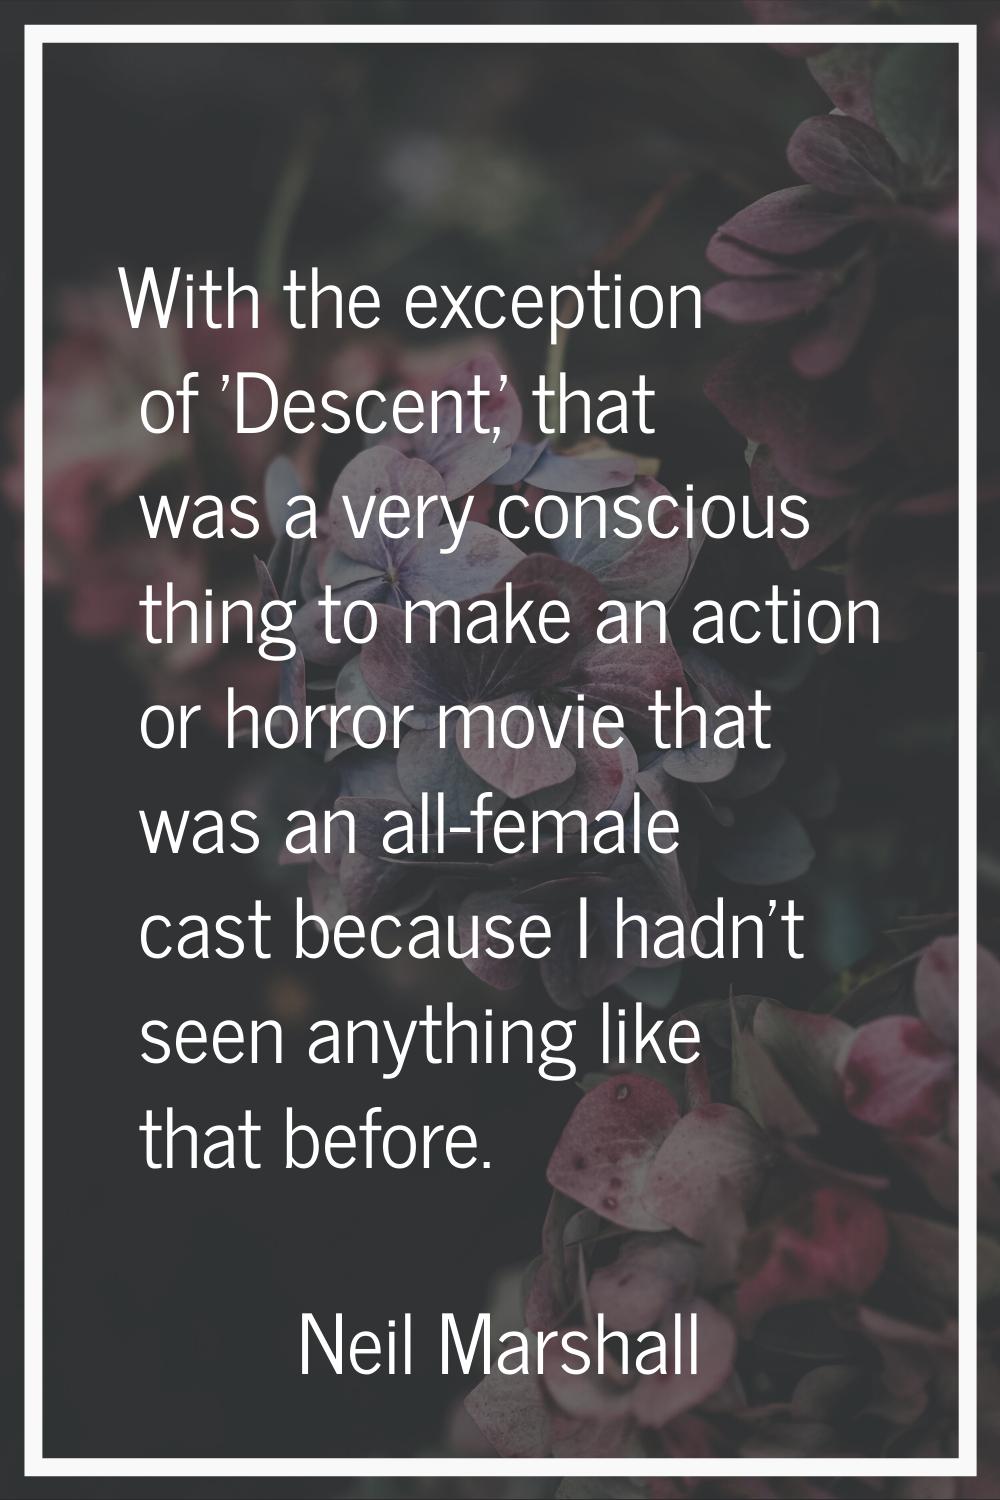 With the exception of 'Descent,' that was a very conscious thing to make an action or horror movie 